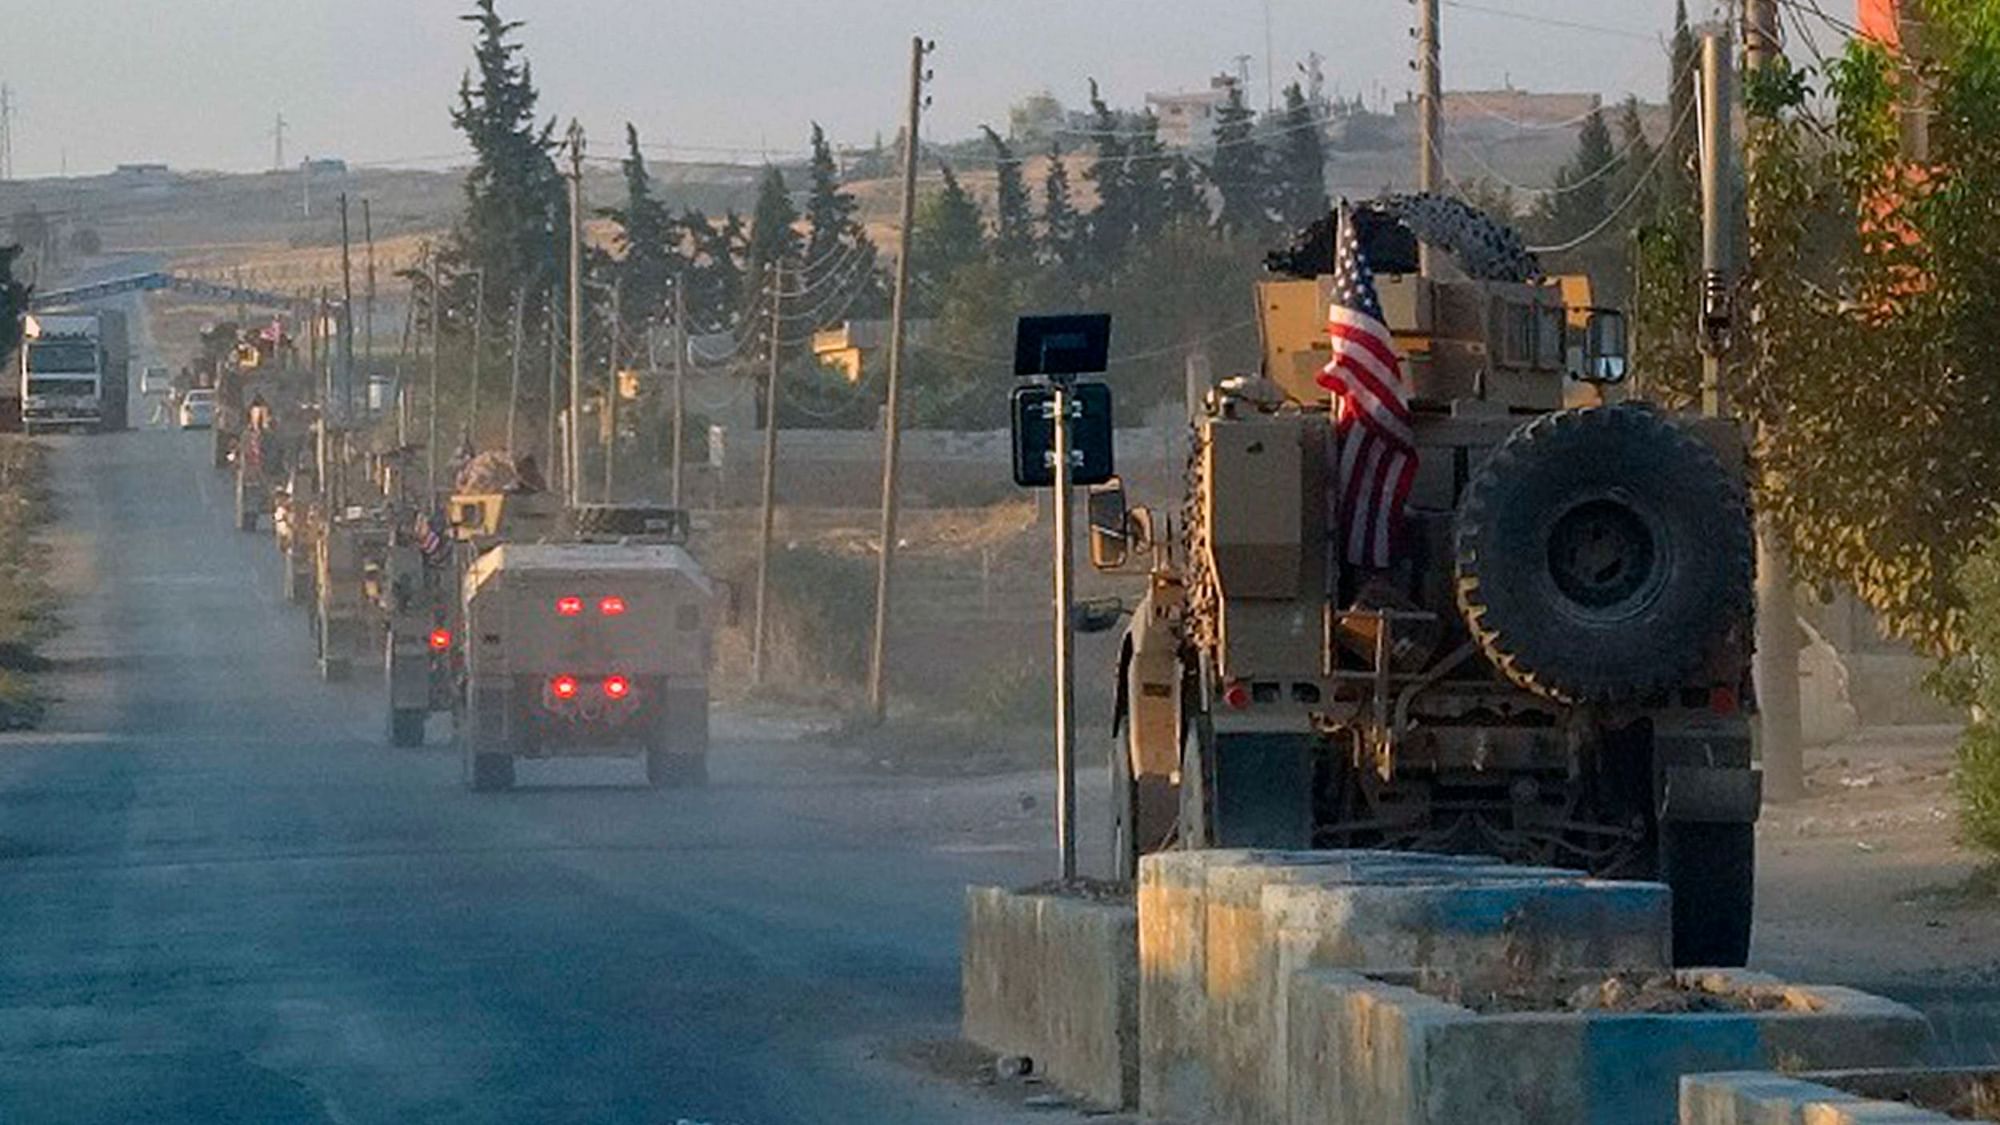 US Troops withdrawing from northeast Syrian Border ahead of an anticipated Turkish invasion.